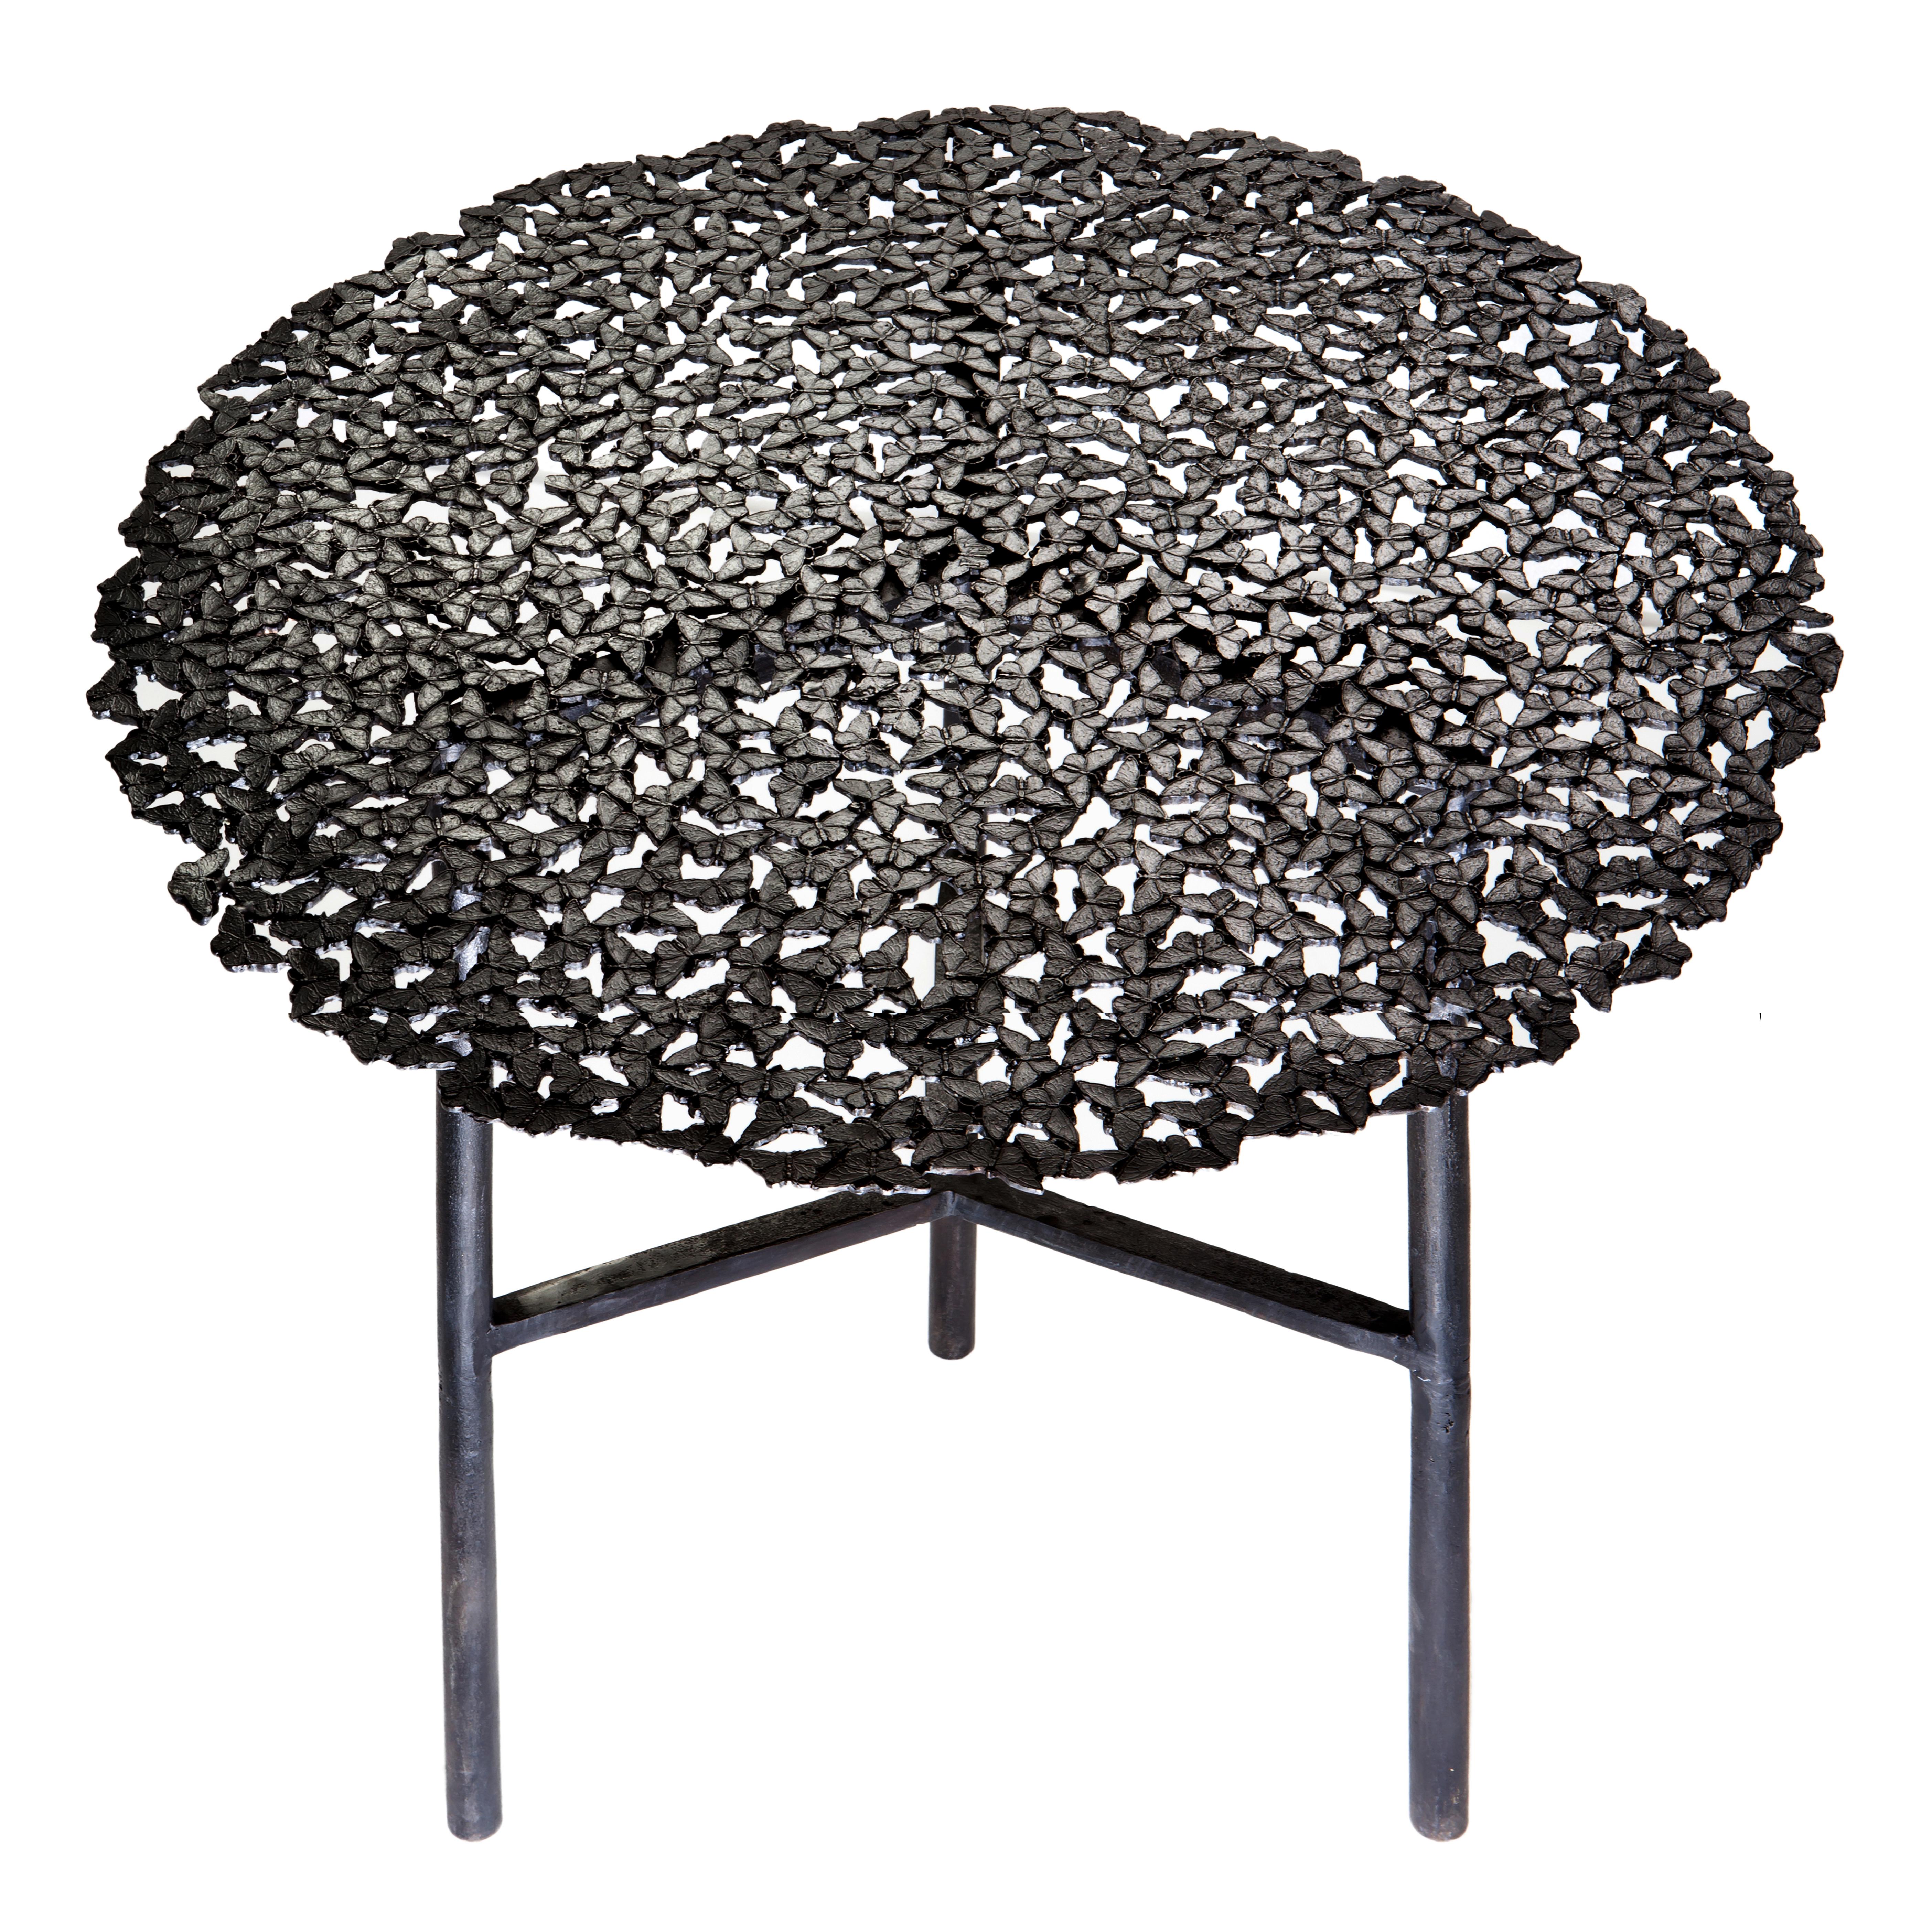 Jean Black Patina Bronze Side Table by Fred and Juul
Dimensions: Ø 60 x H 54 cm.
Materials: Black patinated bronze.

Dimensions may vary. Available in black patinated or white bronze finishes. Custom sizes, materials or finishes are available on